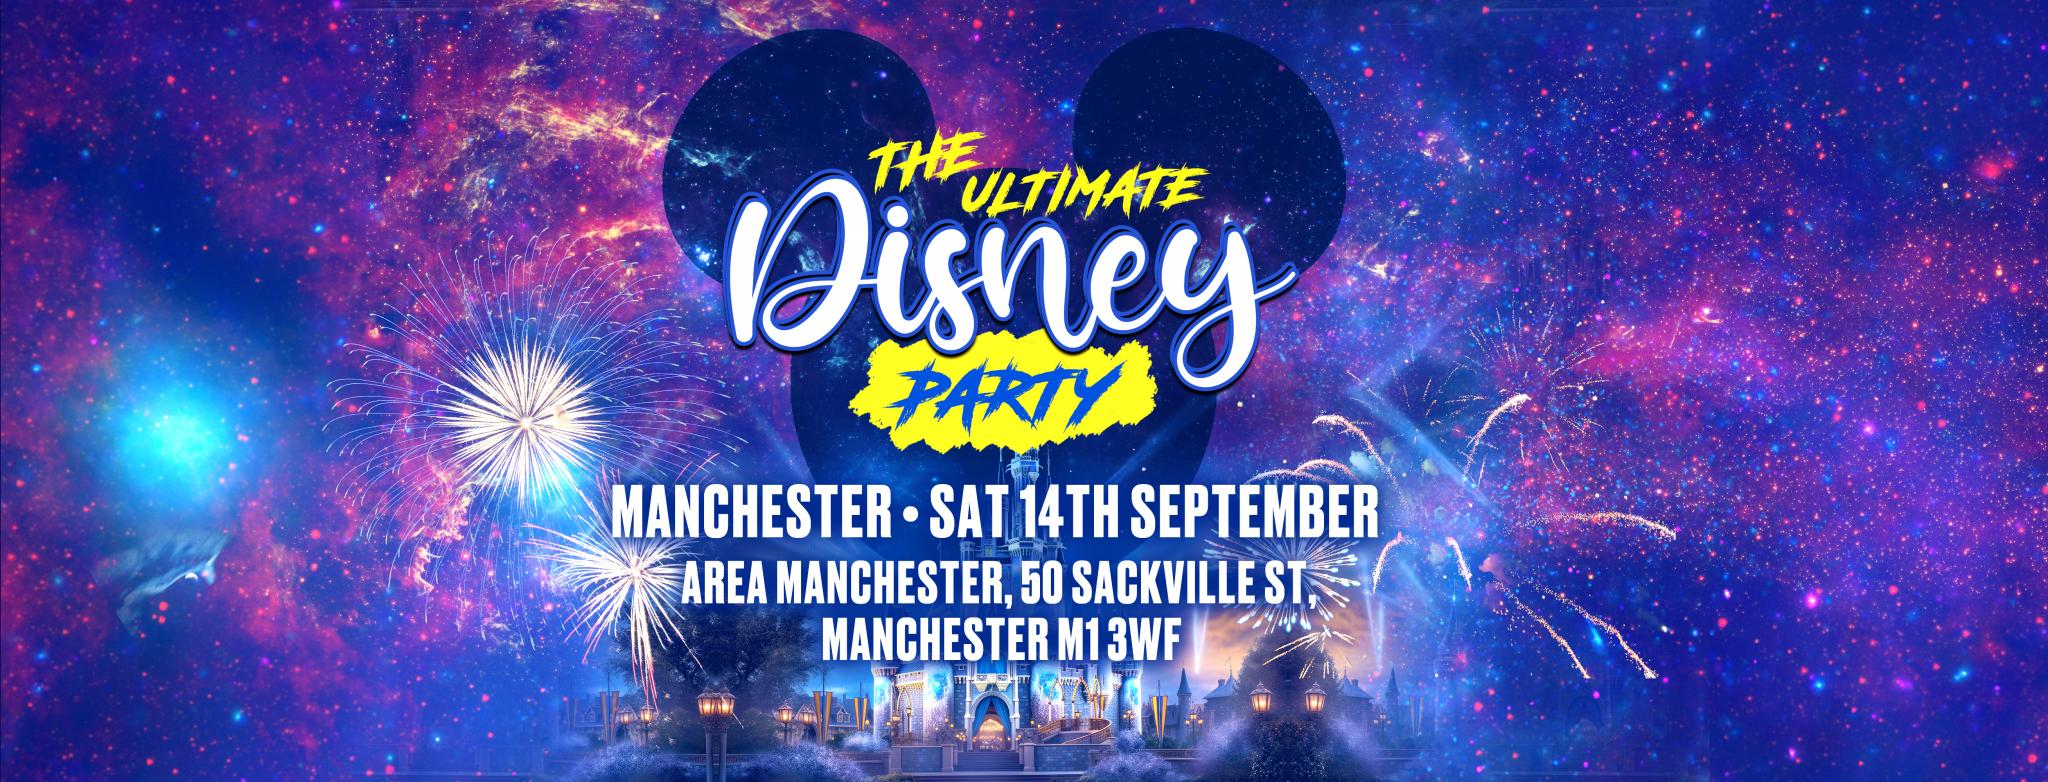 The Ultimate Disney Party - Manchester